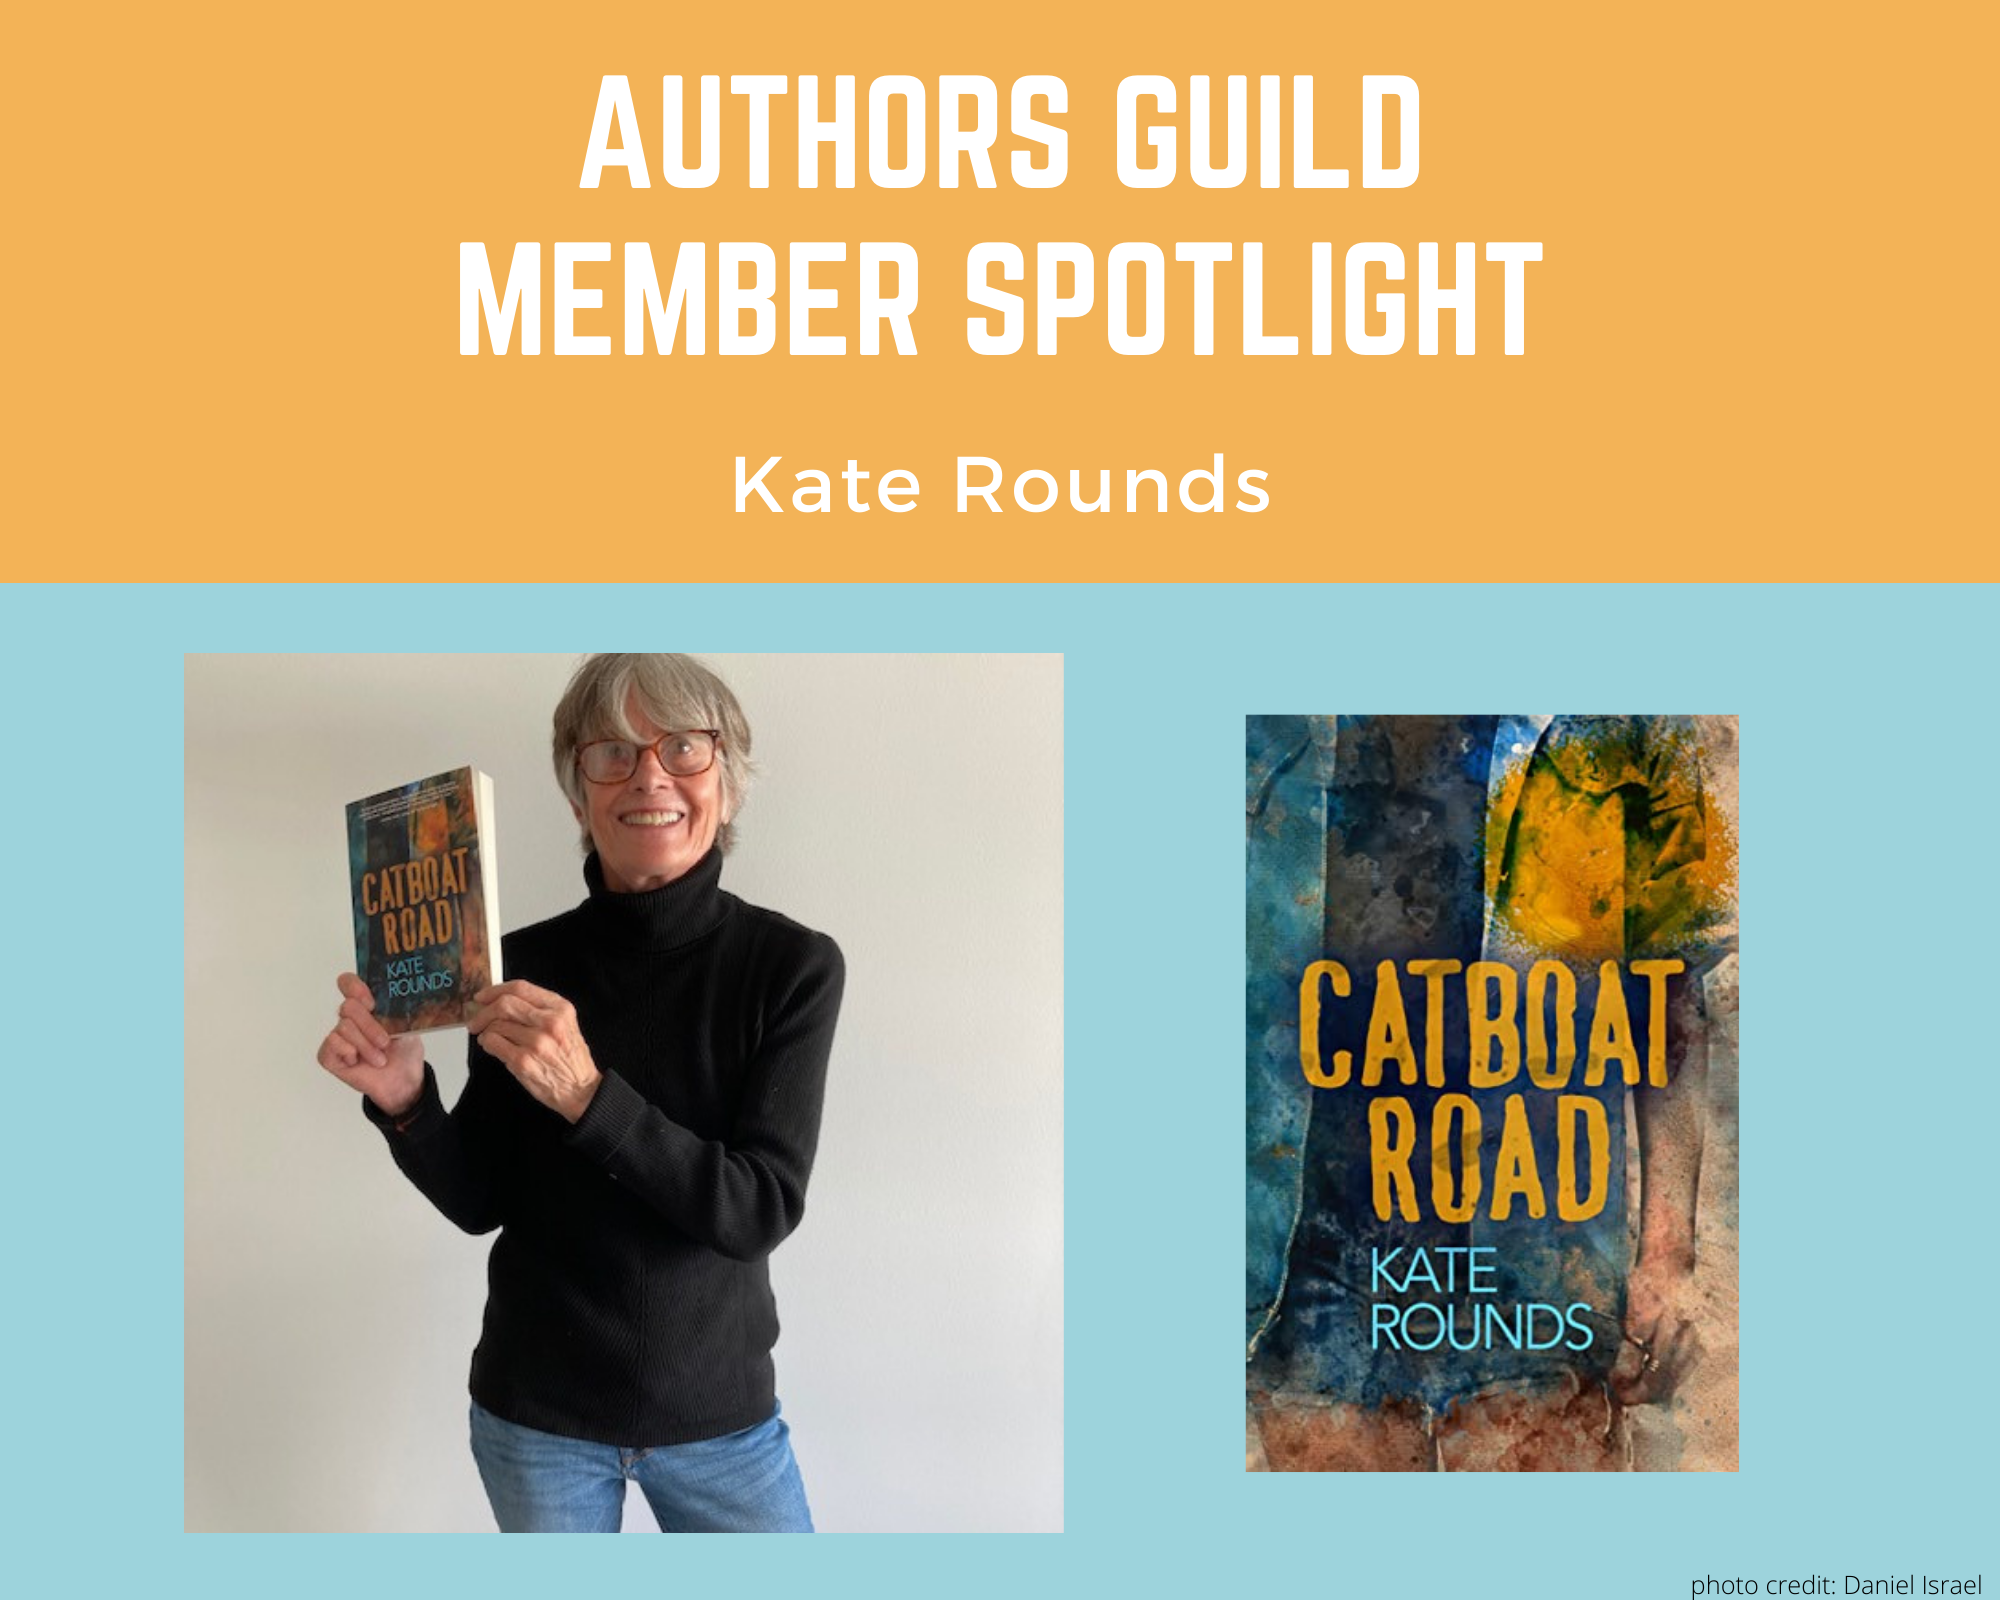 author Kate Rounds smiling at the camera as she holds up her book Catboat Road